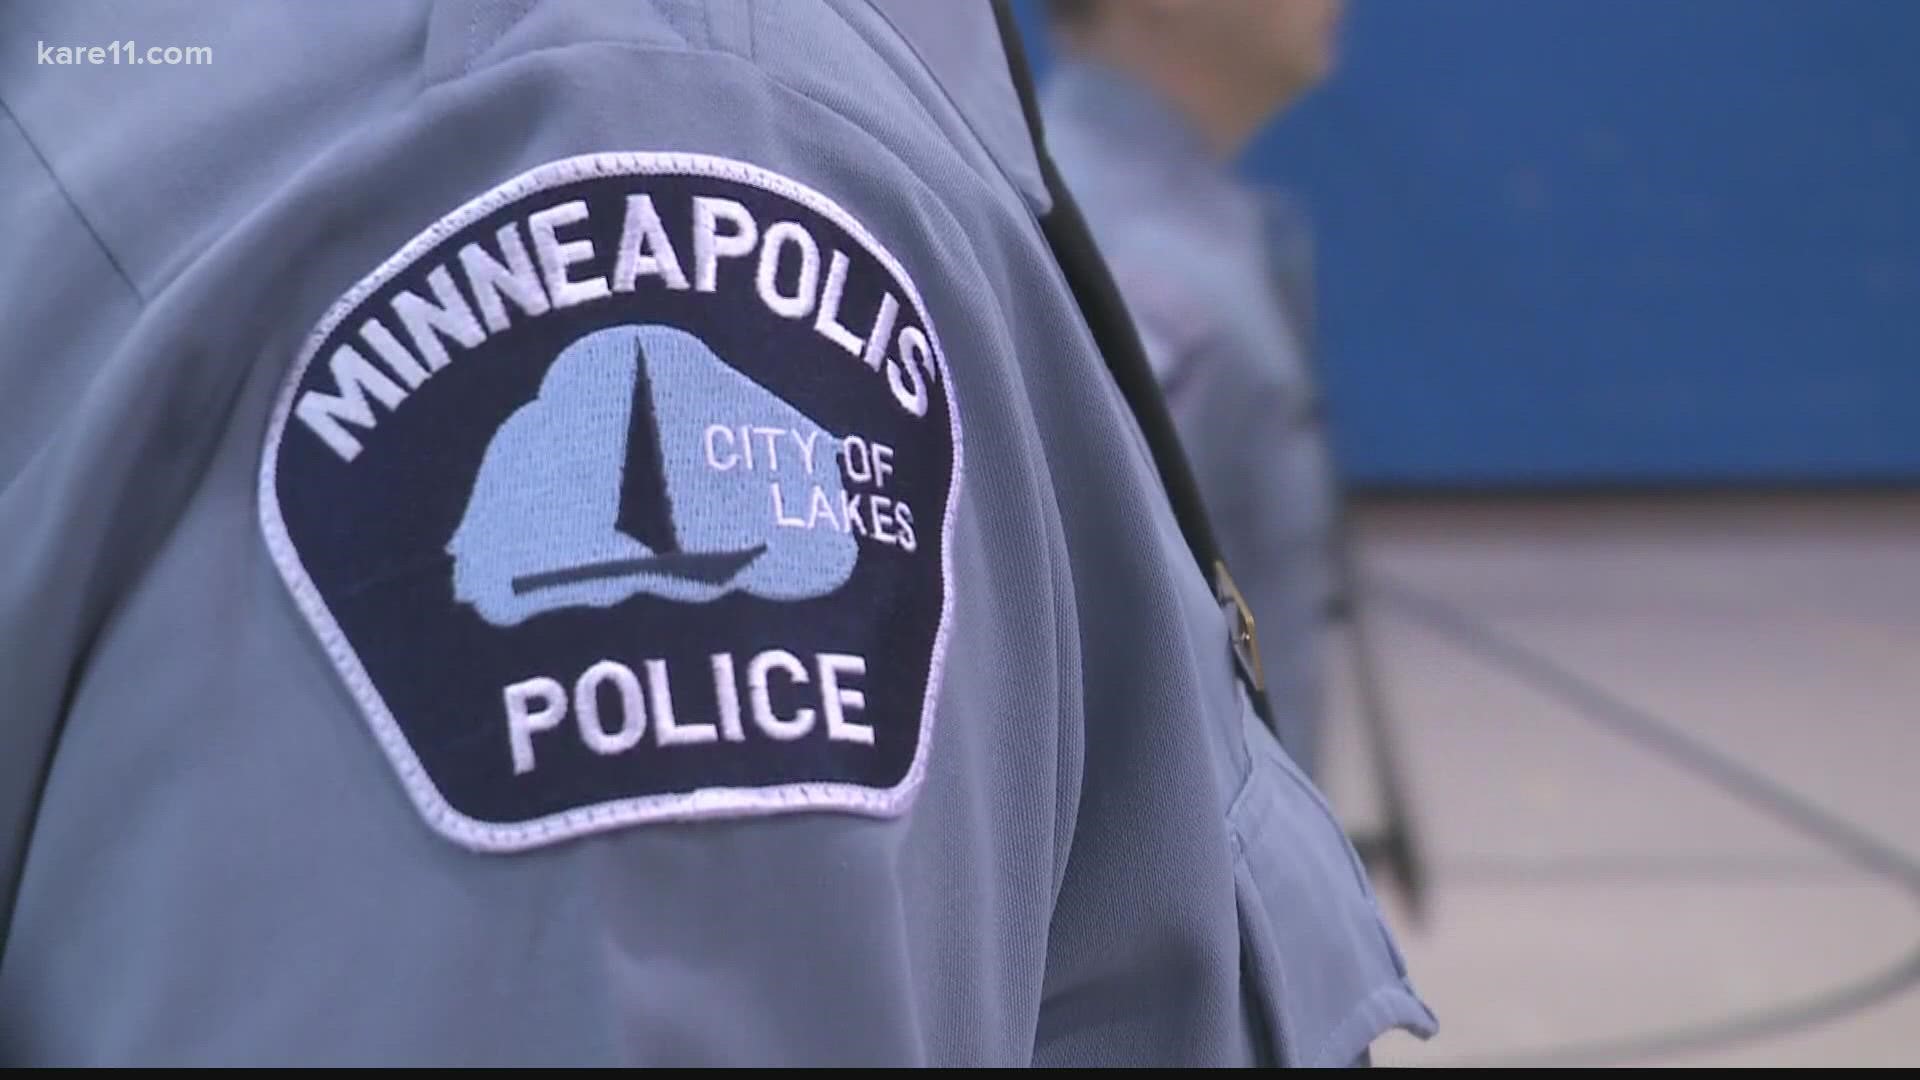 Between 2013 and 2019, there were over 2,000 complaints against Minneapolis police. The city found 373 to have merit, and of those, just 39 resulted in "discipline."